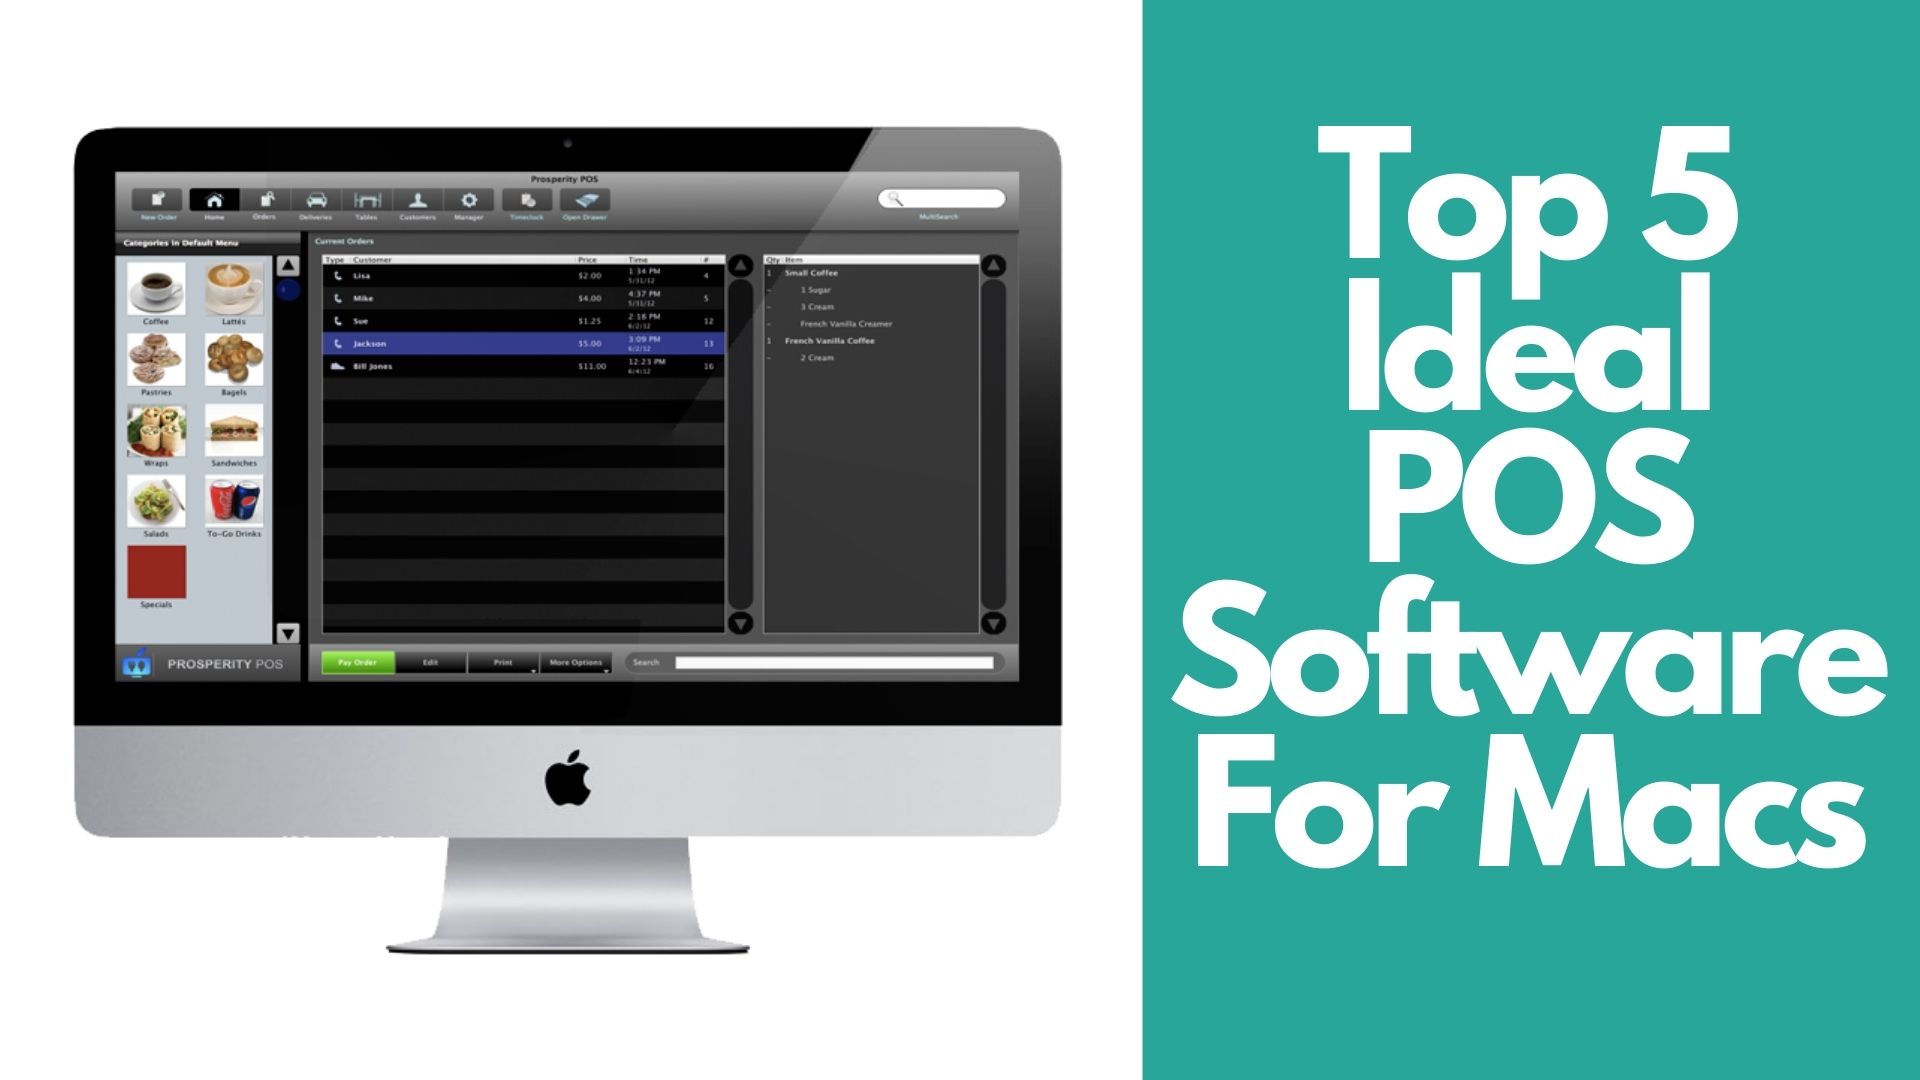 POS software for Macs